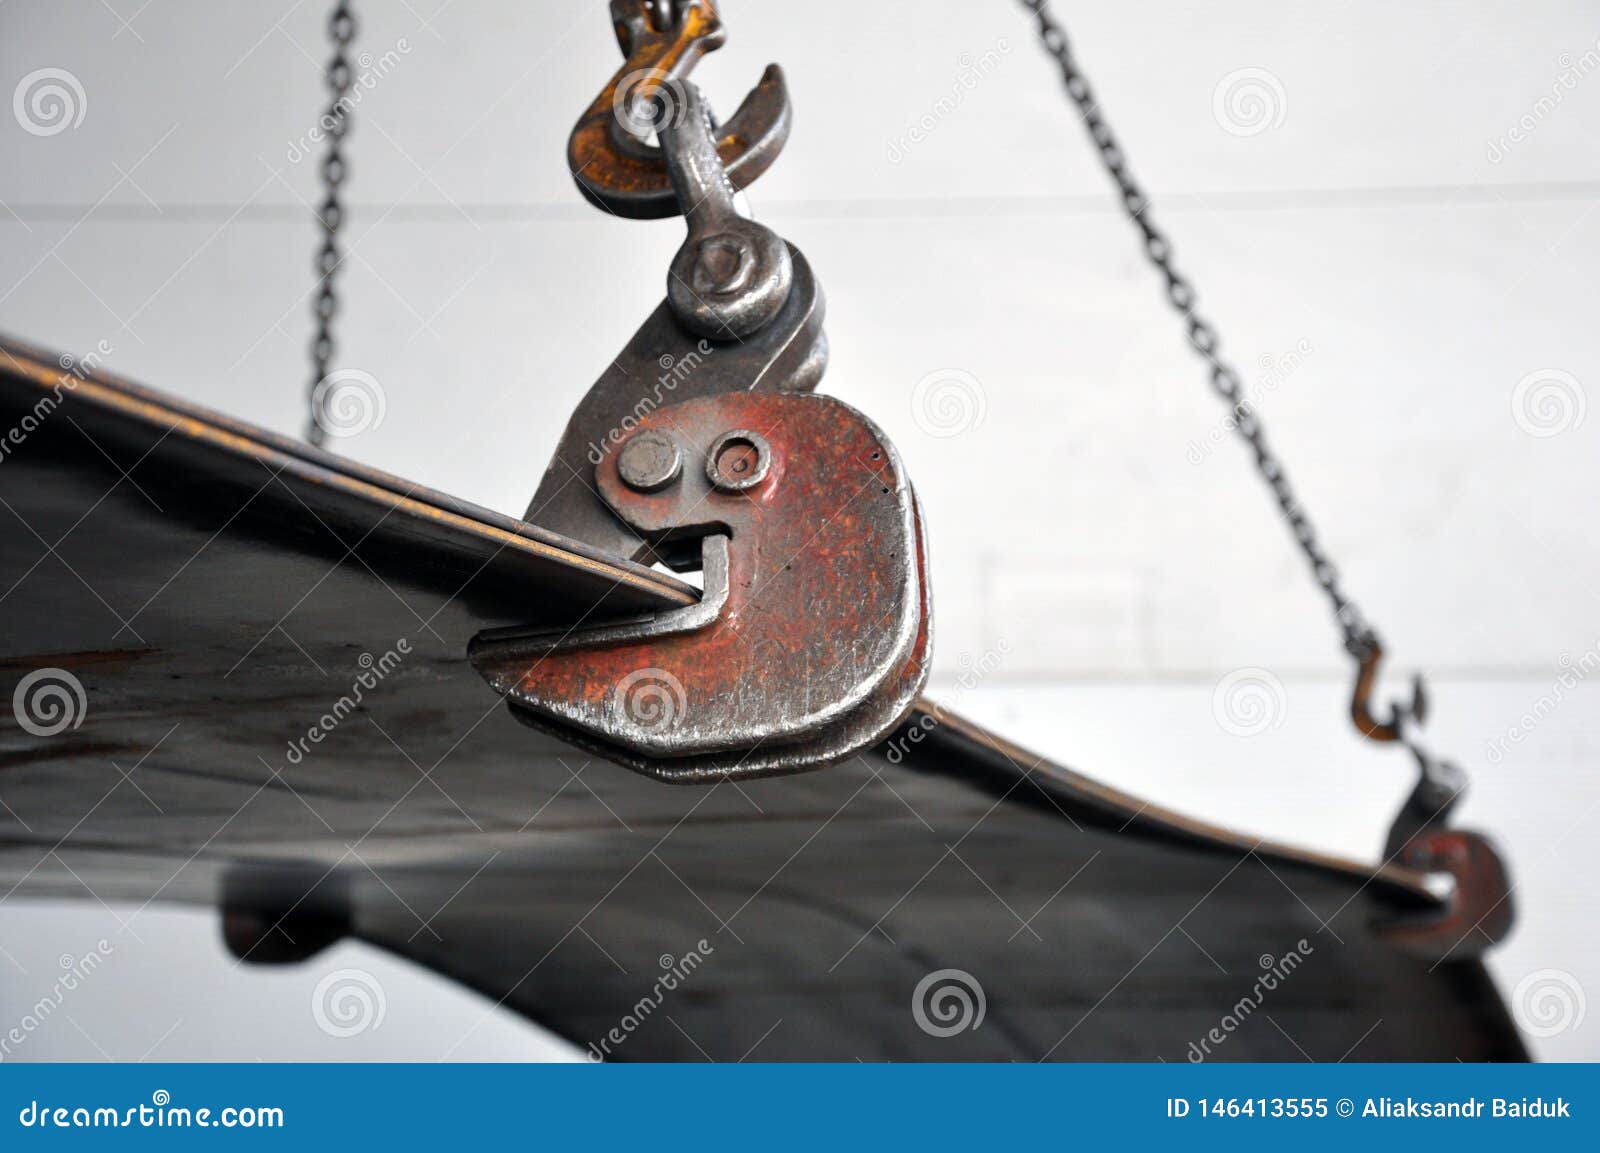 Lifting Chains And Hooks For Loading Sheet Metal. Grab Stock Image Image of sheet, factory